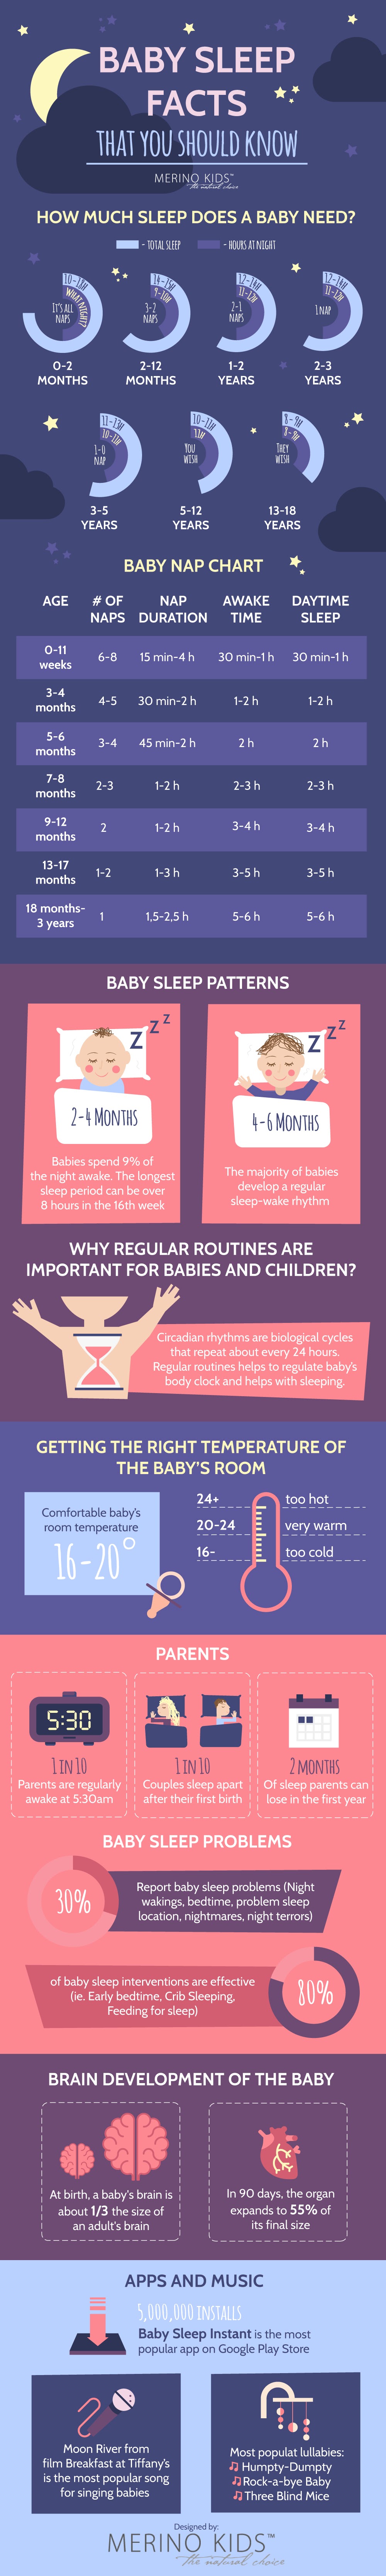 Baby Sleep Facts that you Should Know